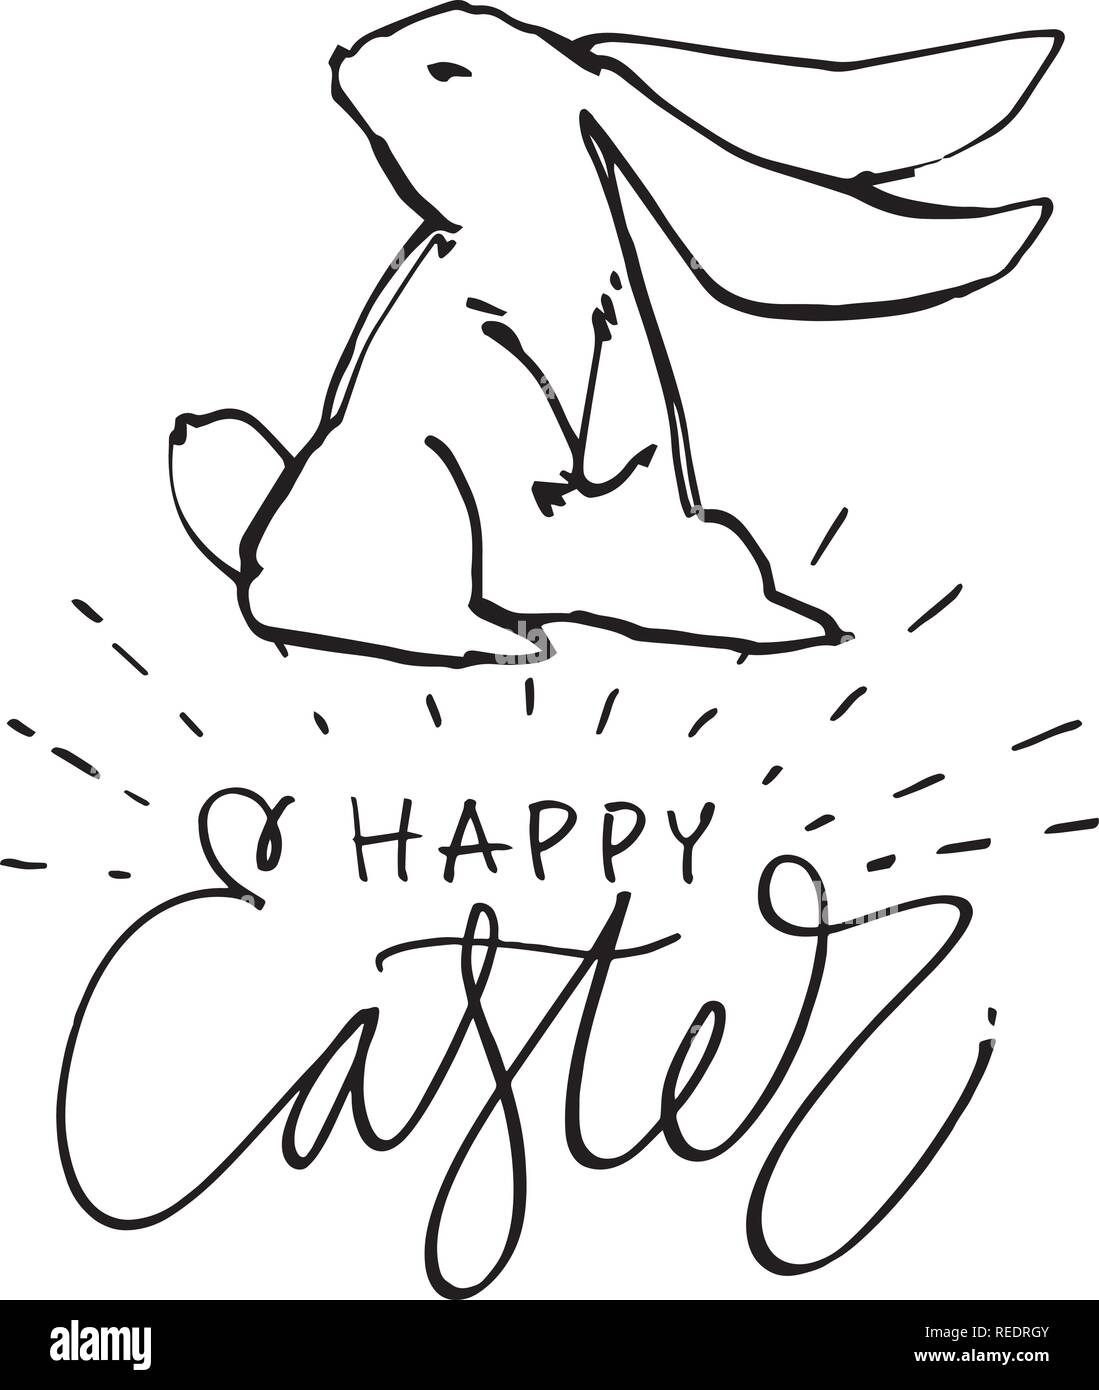 FREE Easter Bunny Drawings | Cute Easter bunnies to print and colour in